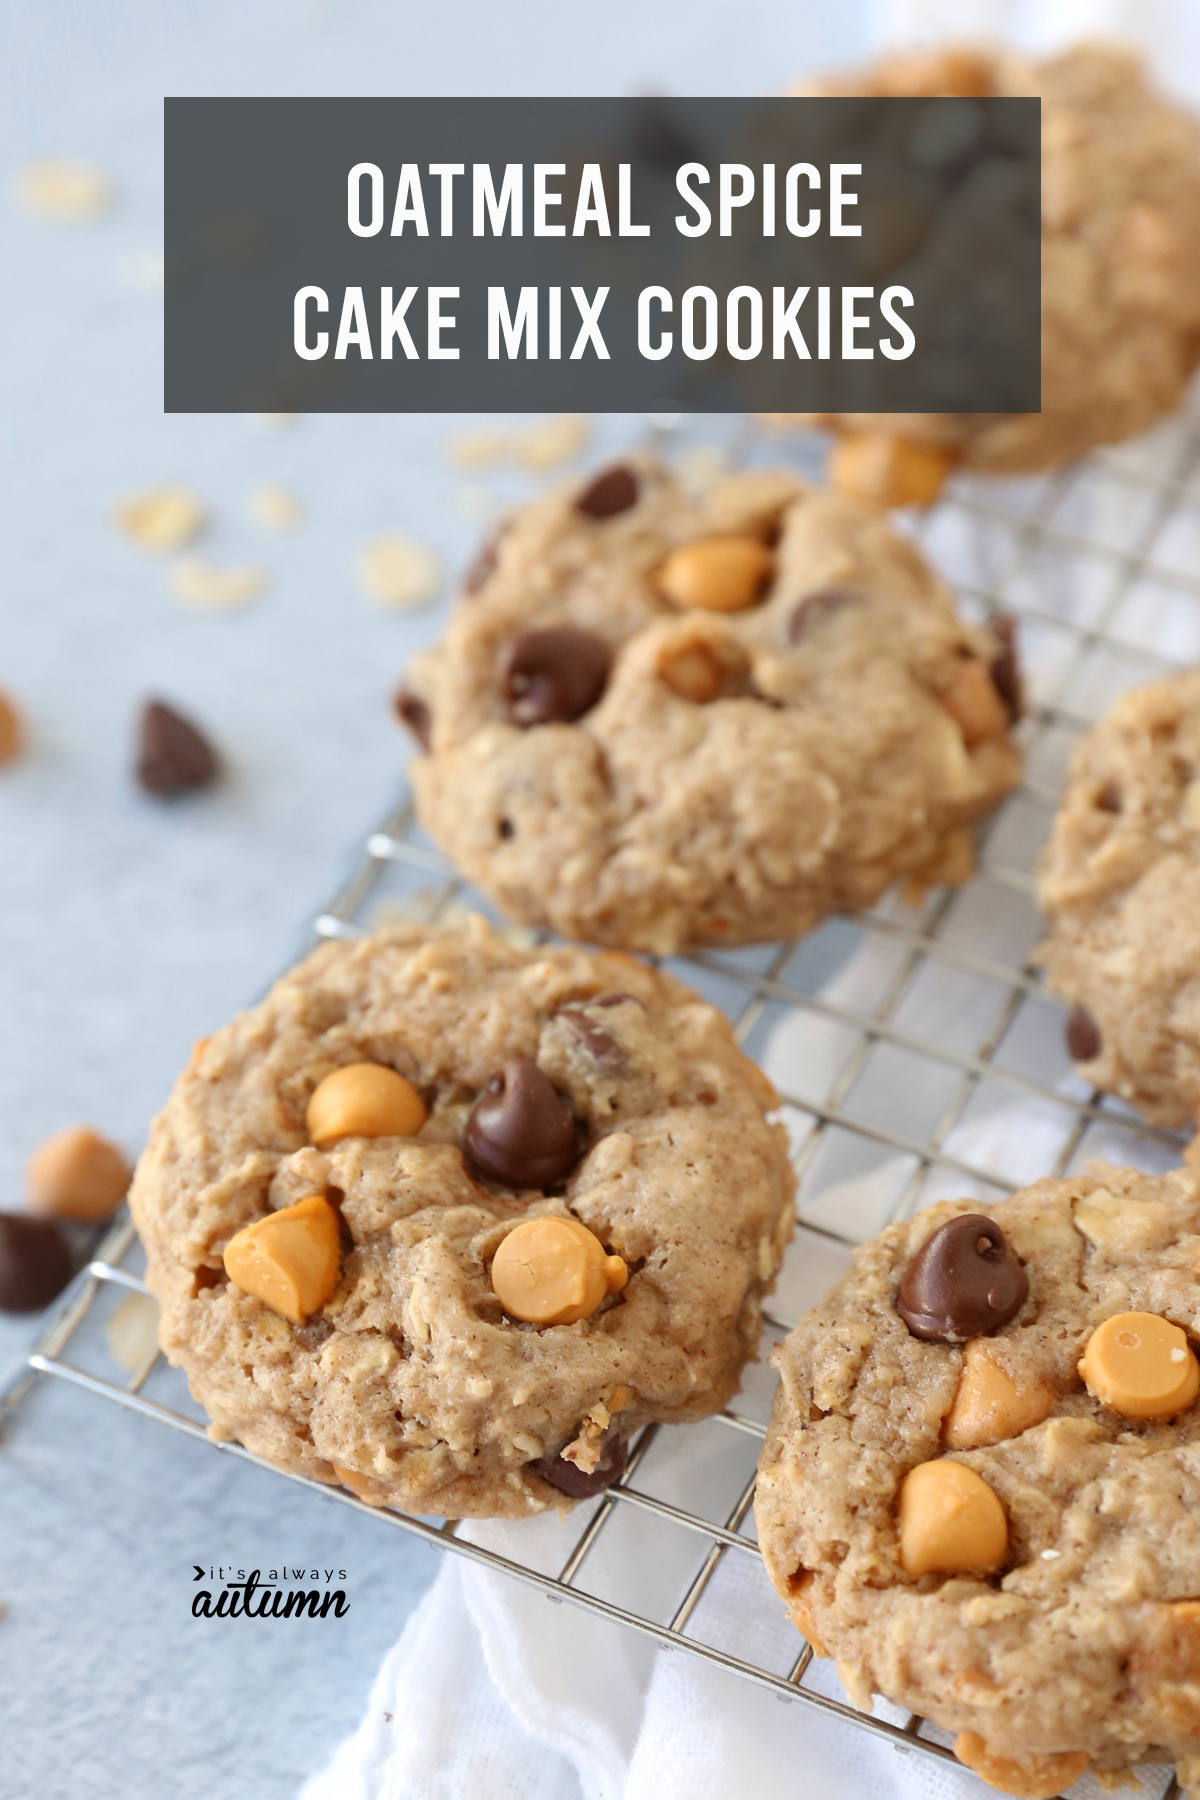 Oatmeal spice cake mix cookies with butterscotch and chocolate chips